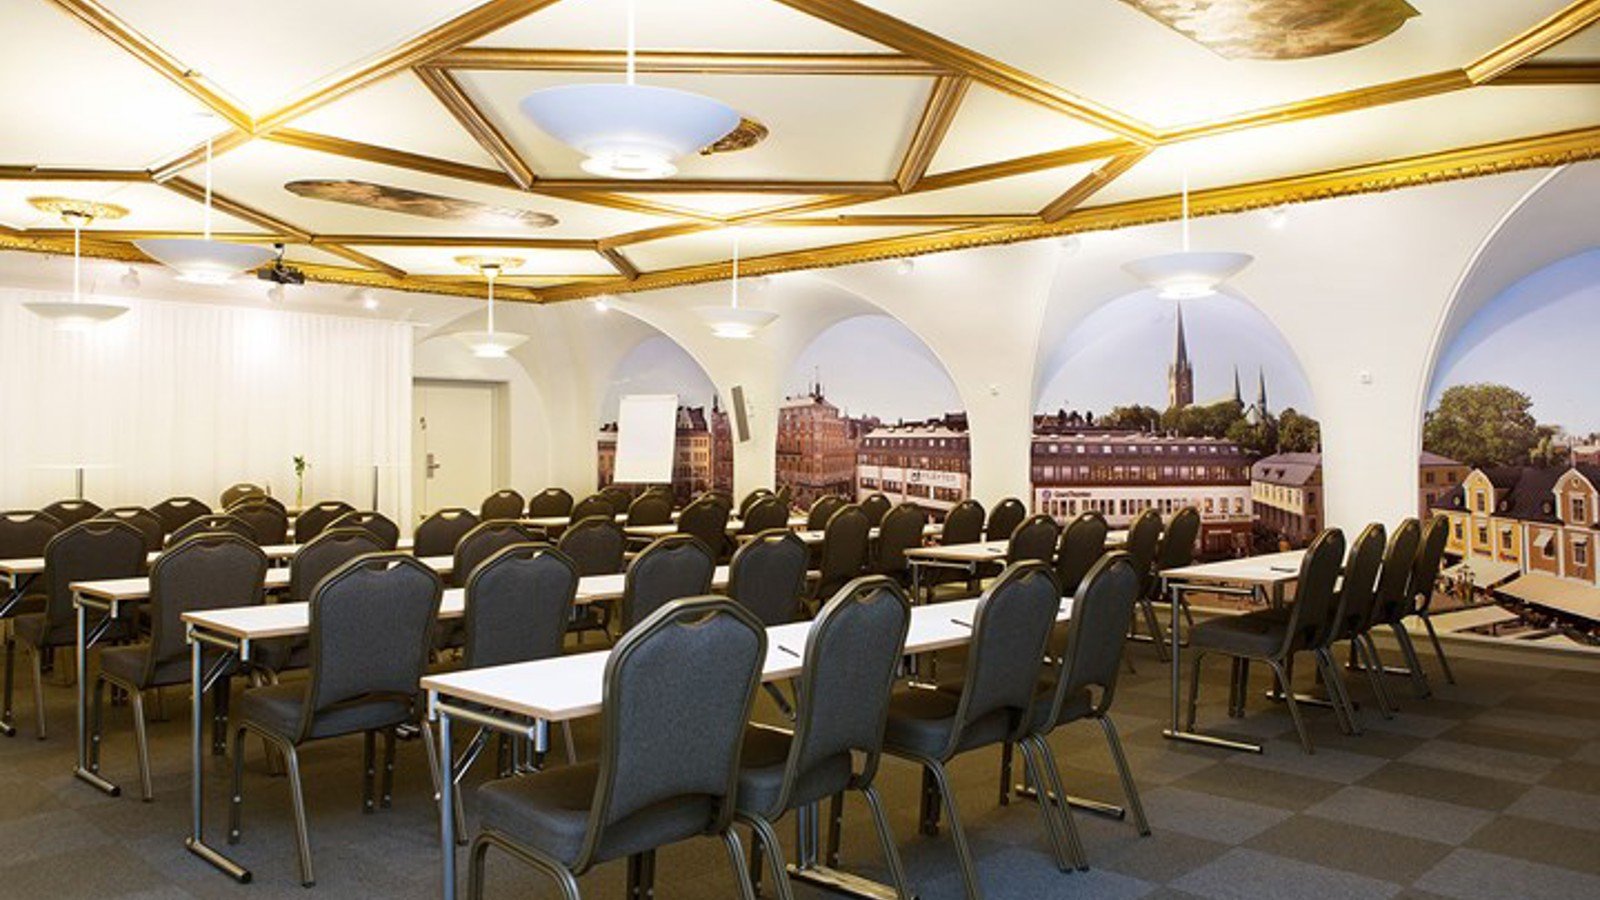 Conference room with lined up chairs, light ceiling with gold details and dark floor